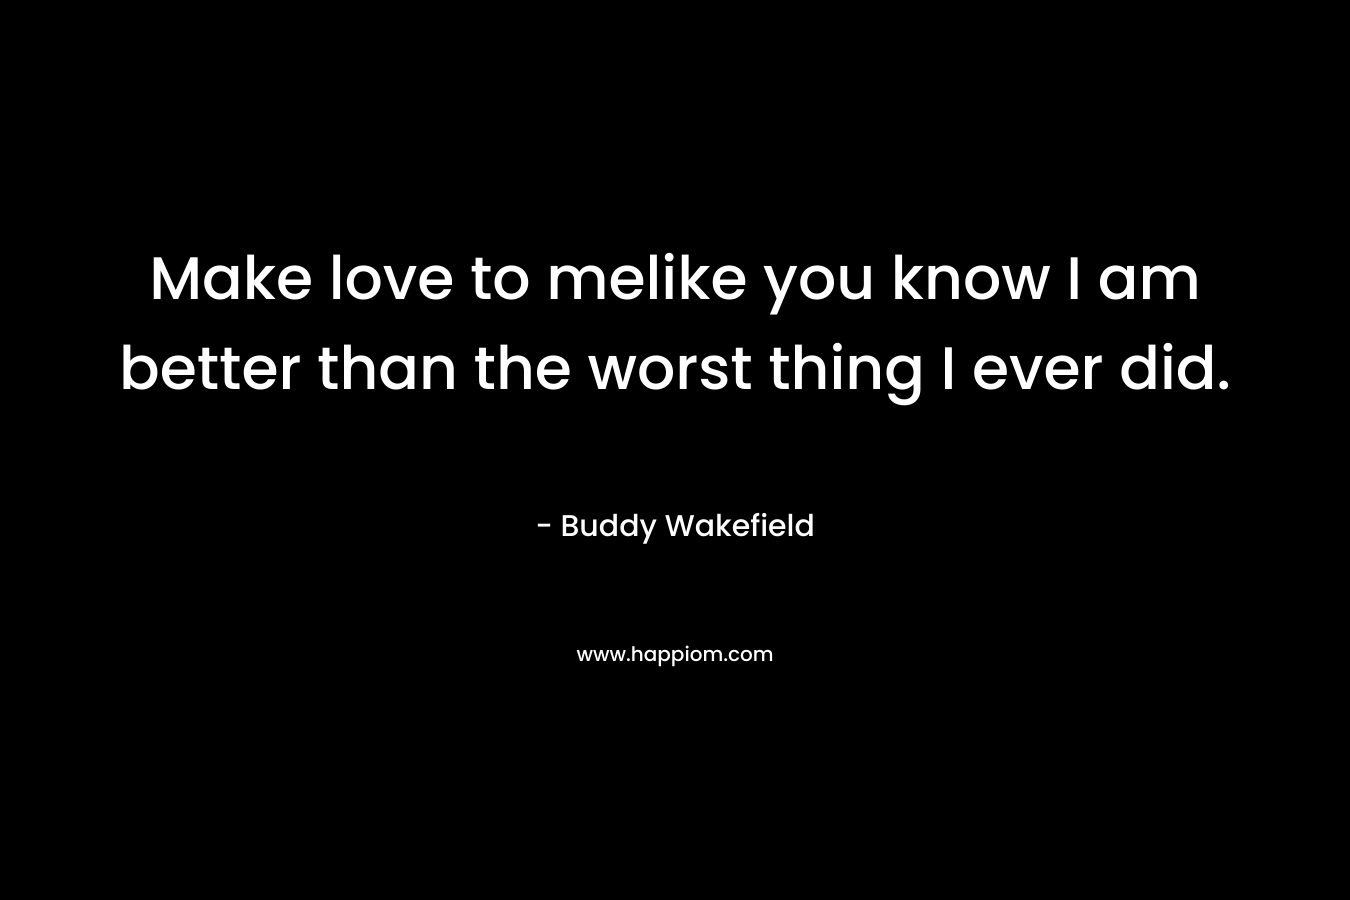 Make love to melike you know I am better than the worst thing I ever did.